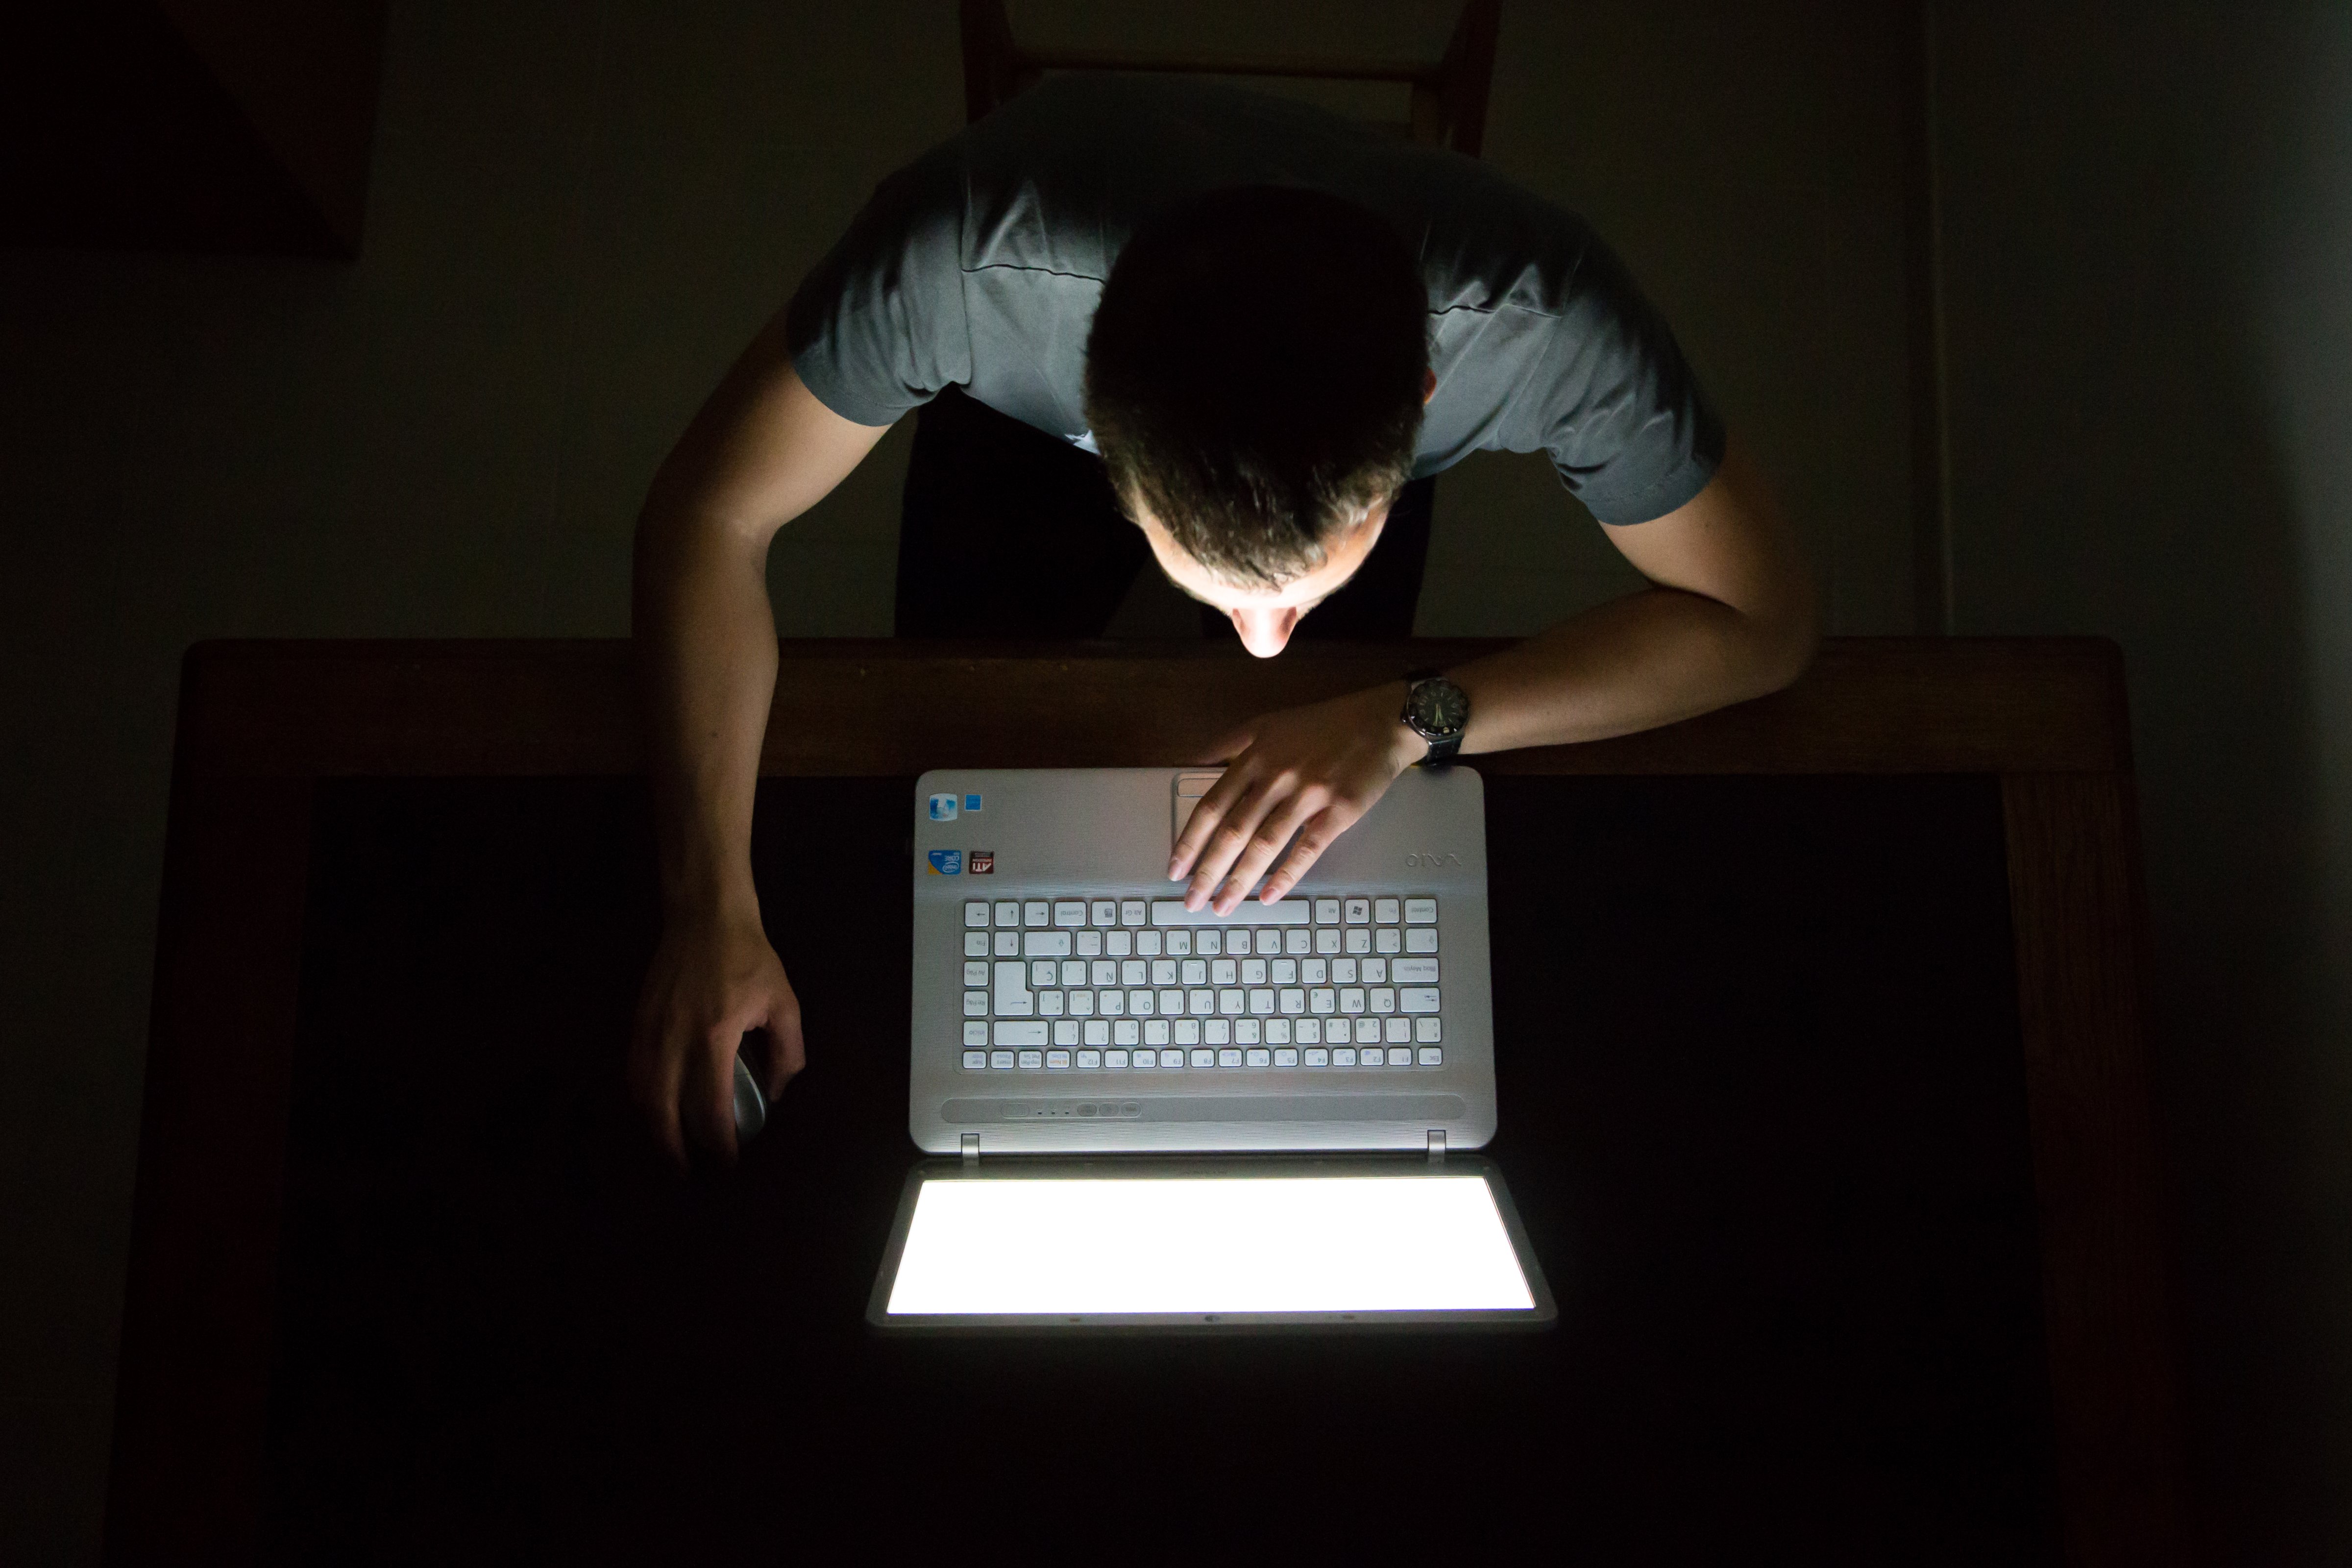 Guy checking internet with laptop at late night with dark room, view from above. (Getty Images)